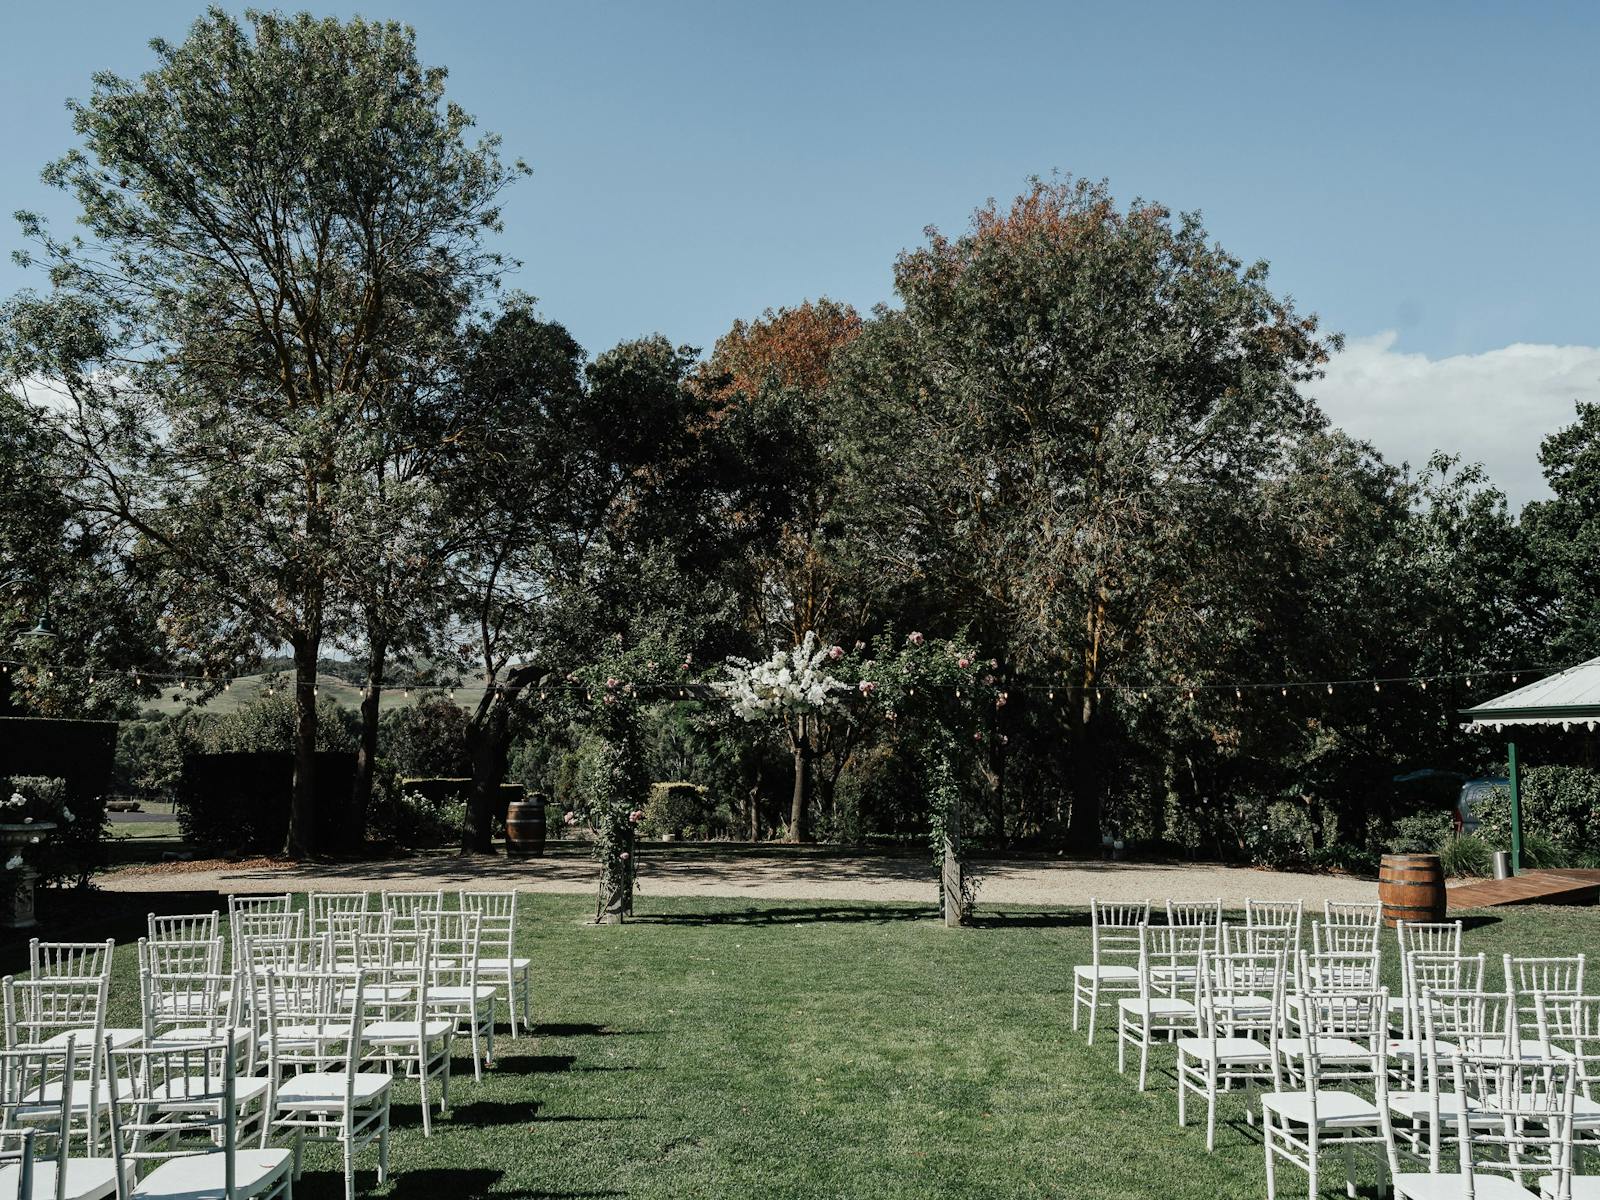 Wedding ceremony space with arbour and wedding seating set up on lawn